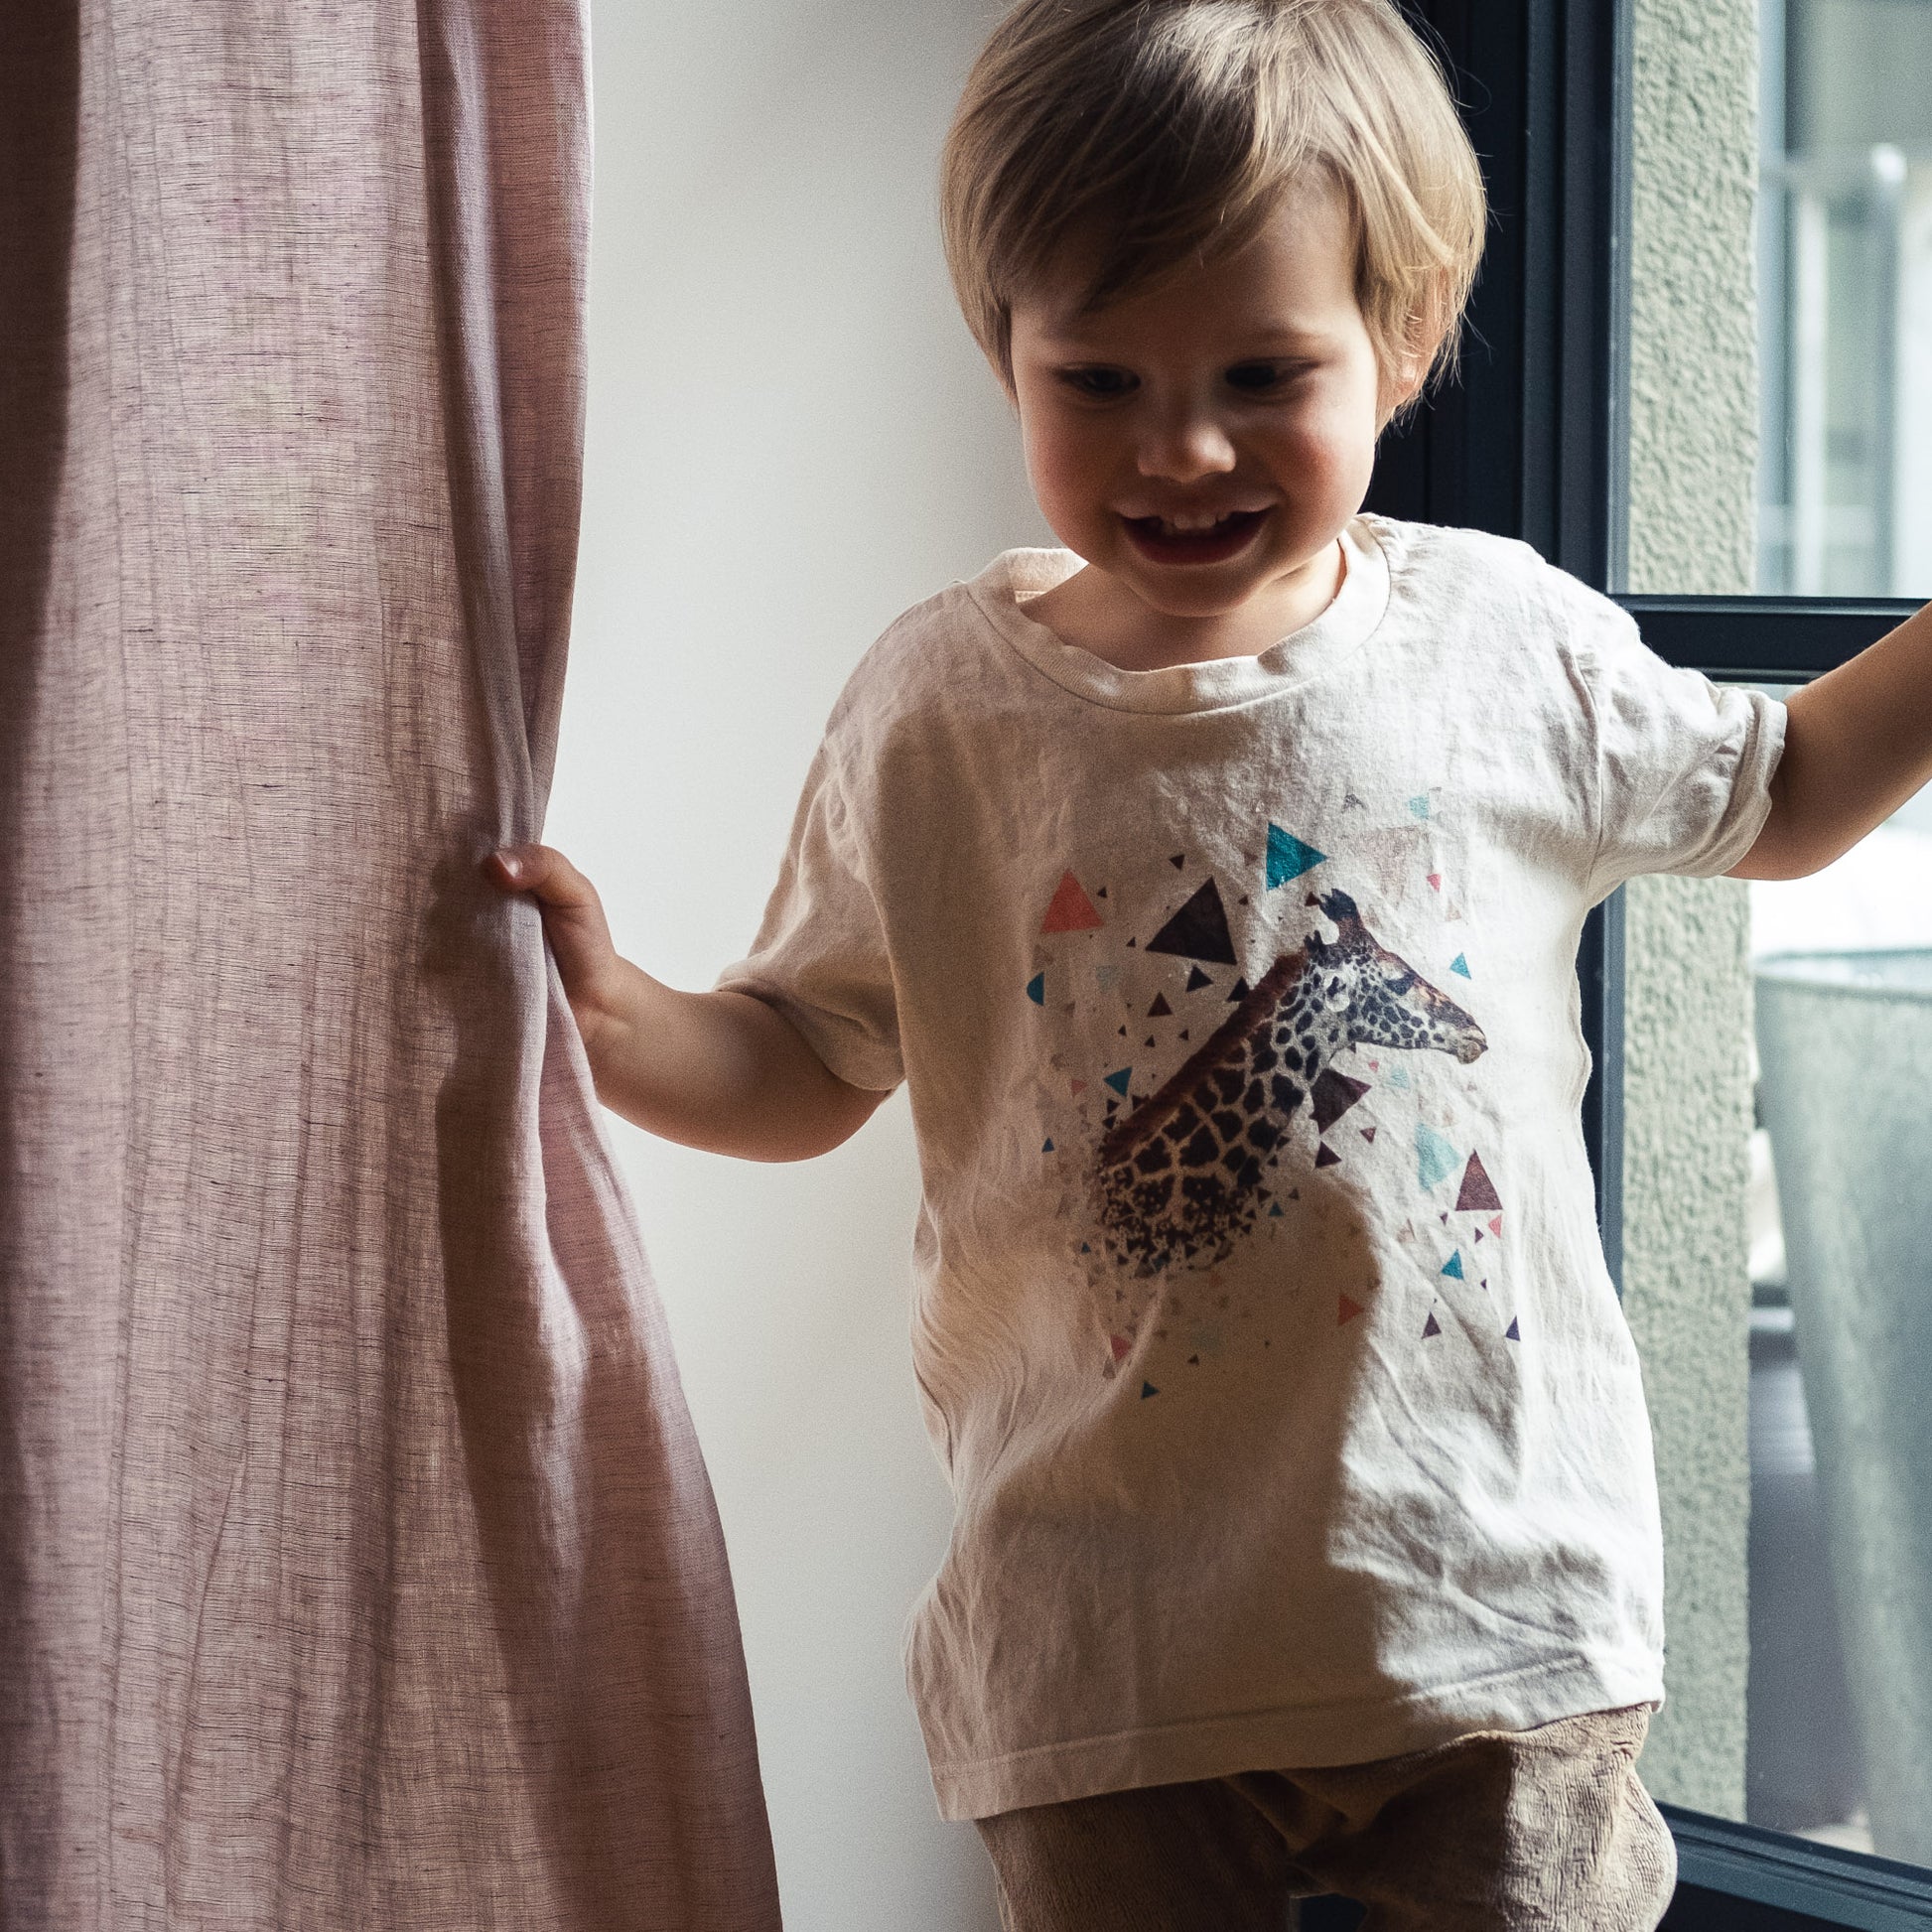 Toddler wearing a natural coloured t-shirt with a giraffe and colourful triangles. Playing with pink curtains.